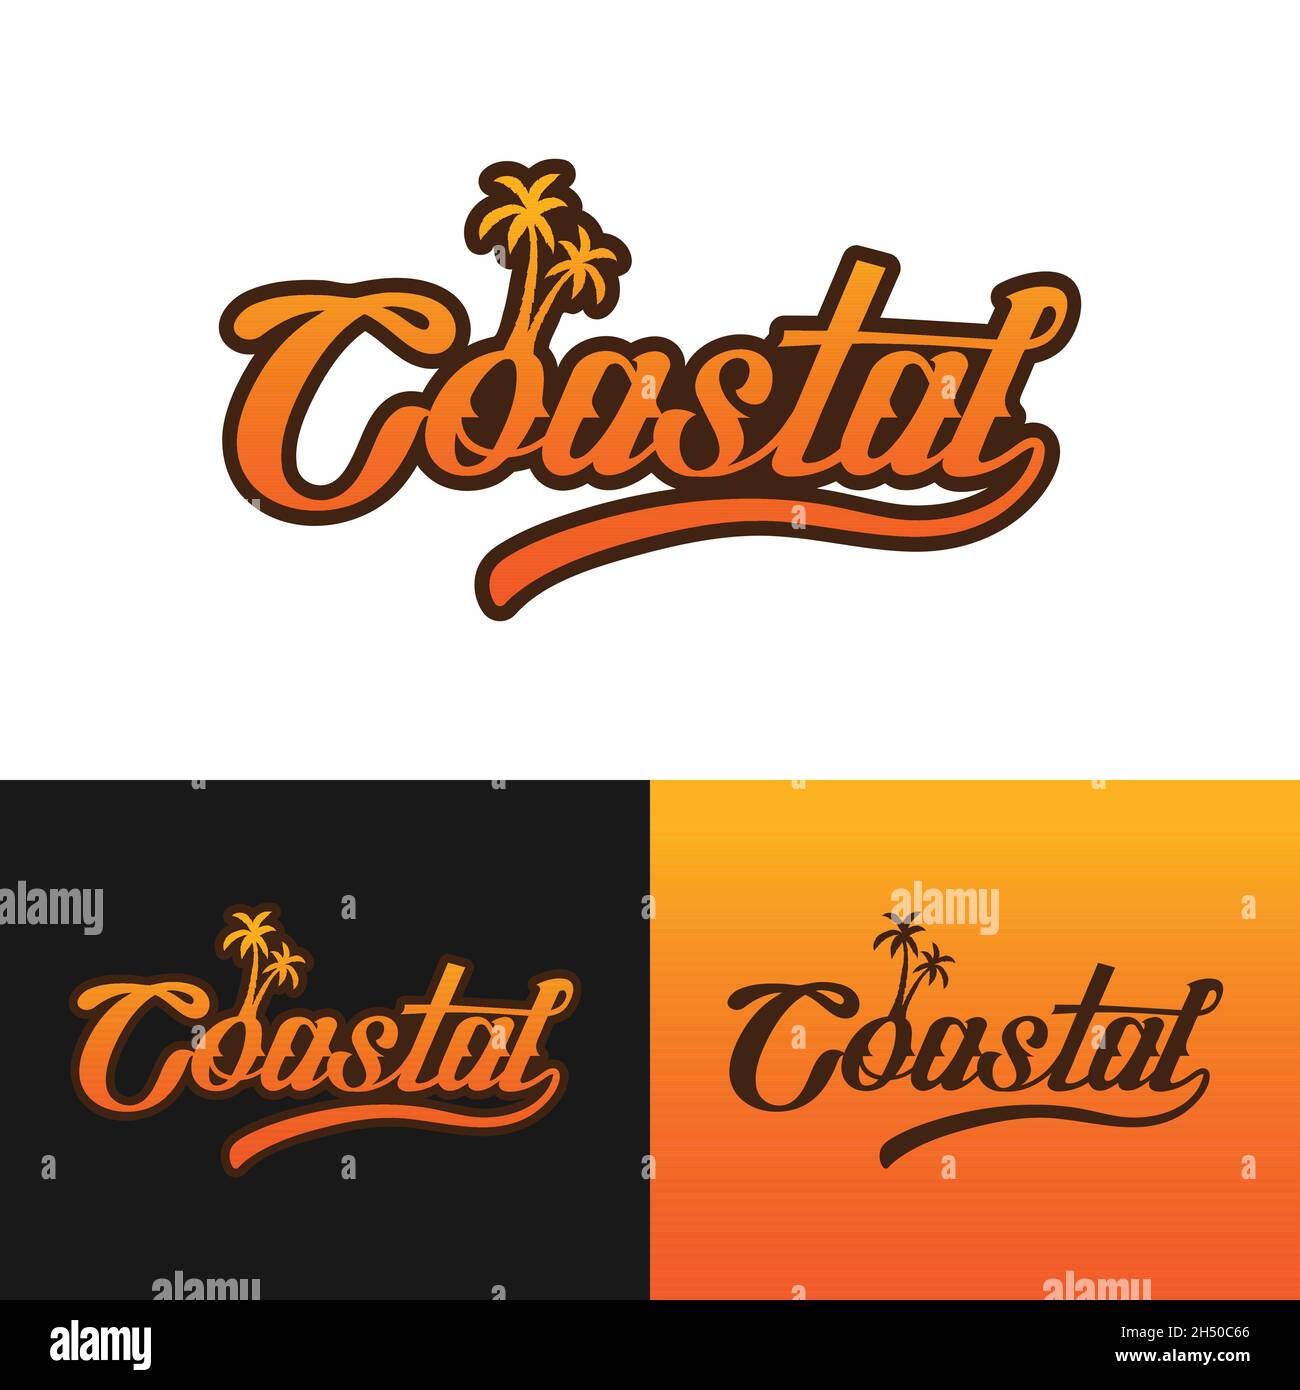 Coastal Wordmark Typography Logo Design Template. Suitable for Coastal Beach Shop Band Brand Apparel Business Company in Vintage Retro Hipster Style. Stock Vector